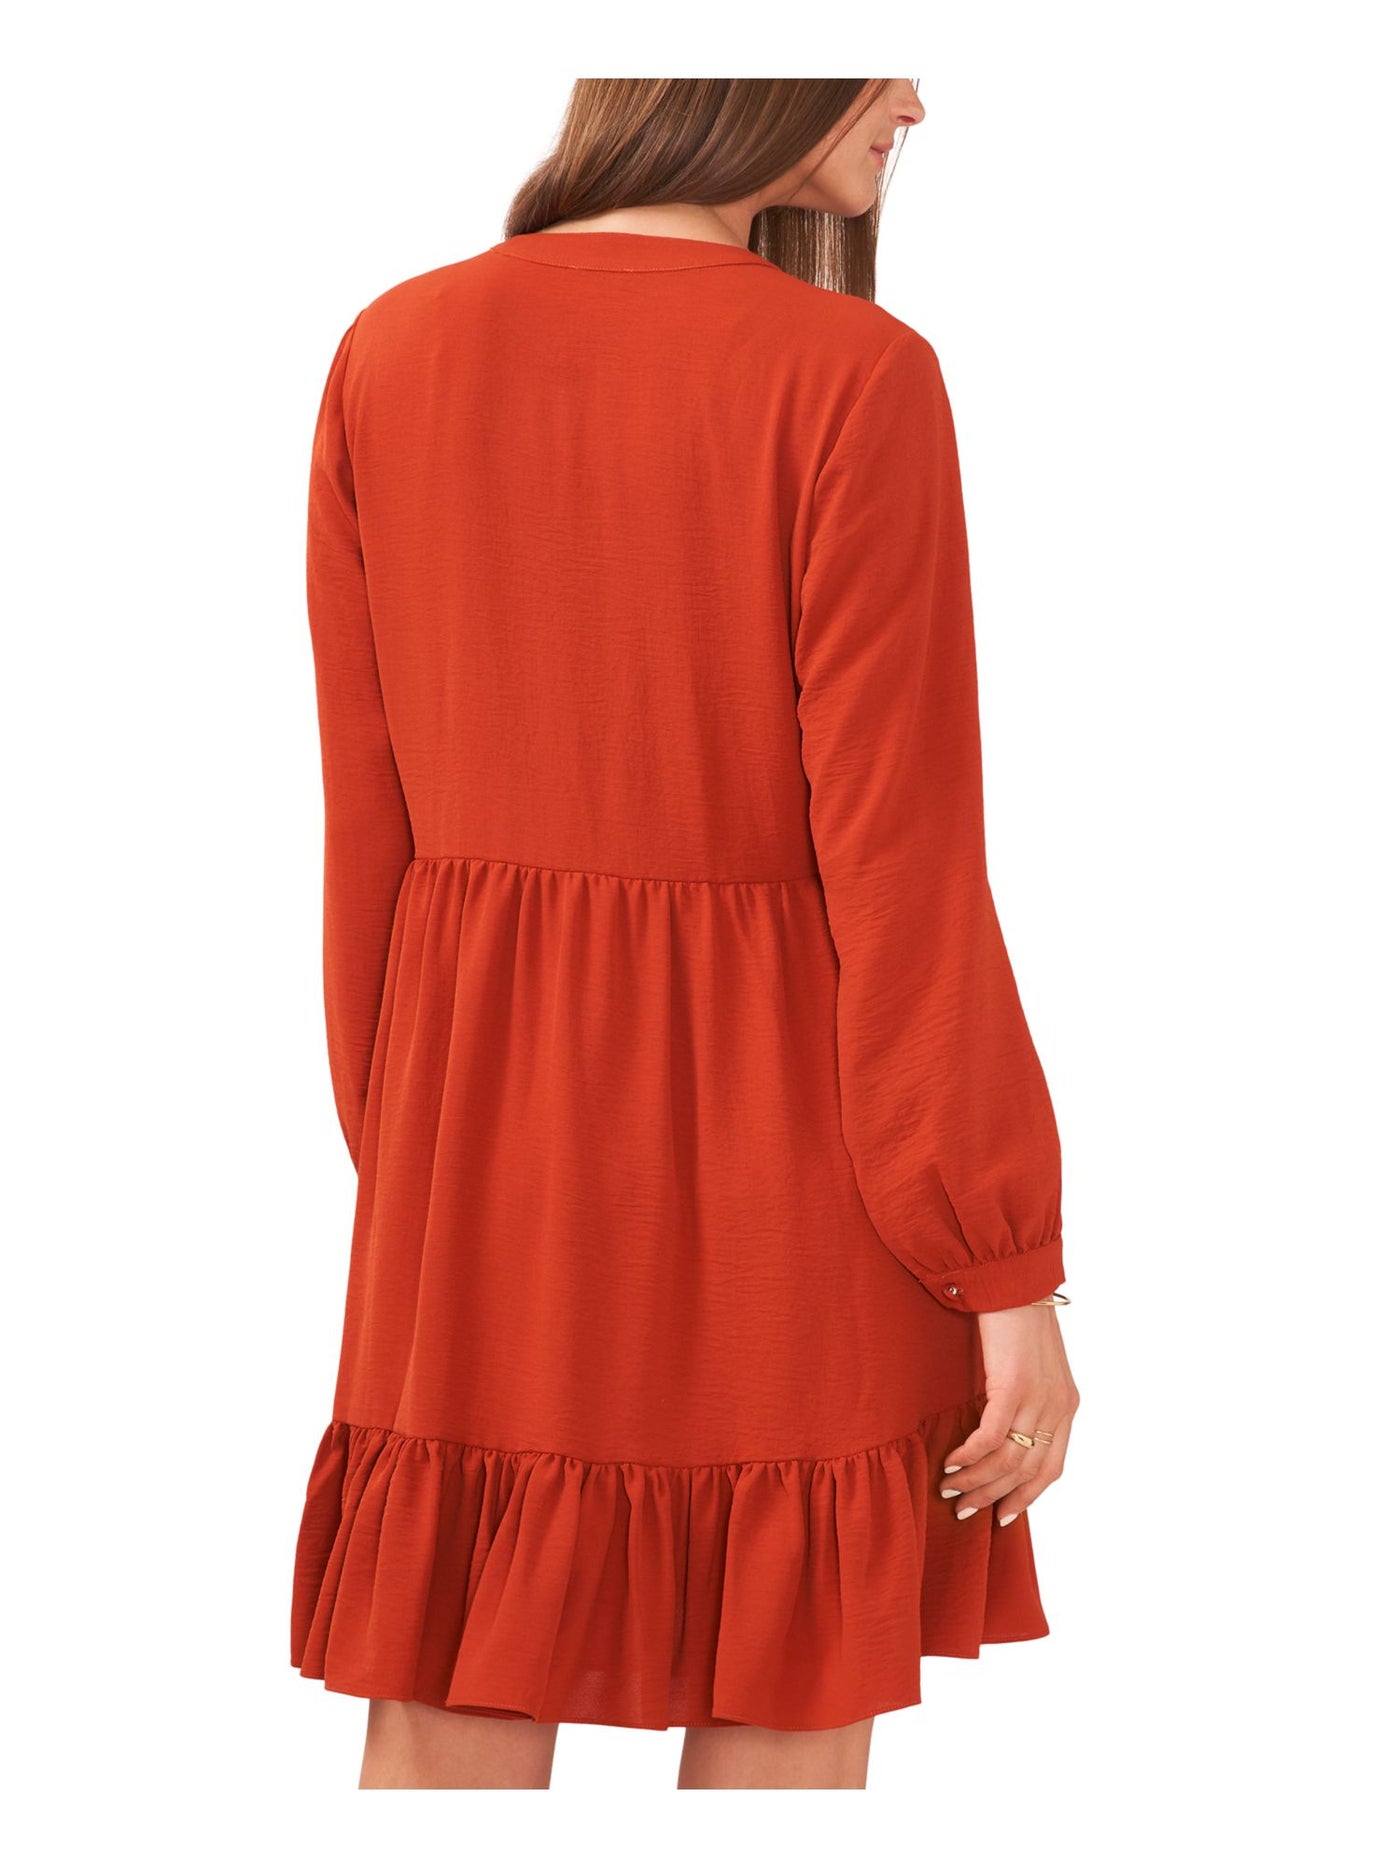 VINCE CAMUTO Womens Orange Ruffled Gathered Pullover Unlined Bodice Cuffed Sleeve Split Above The Knee Fit + Flare Dress XL